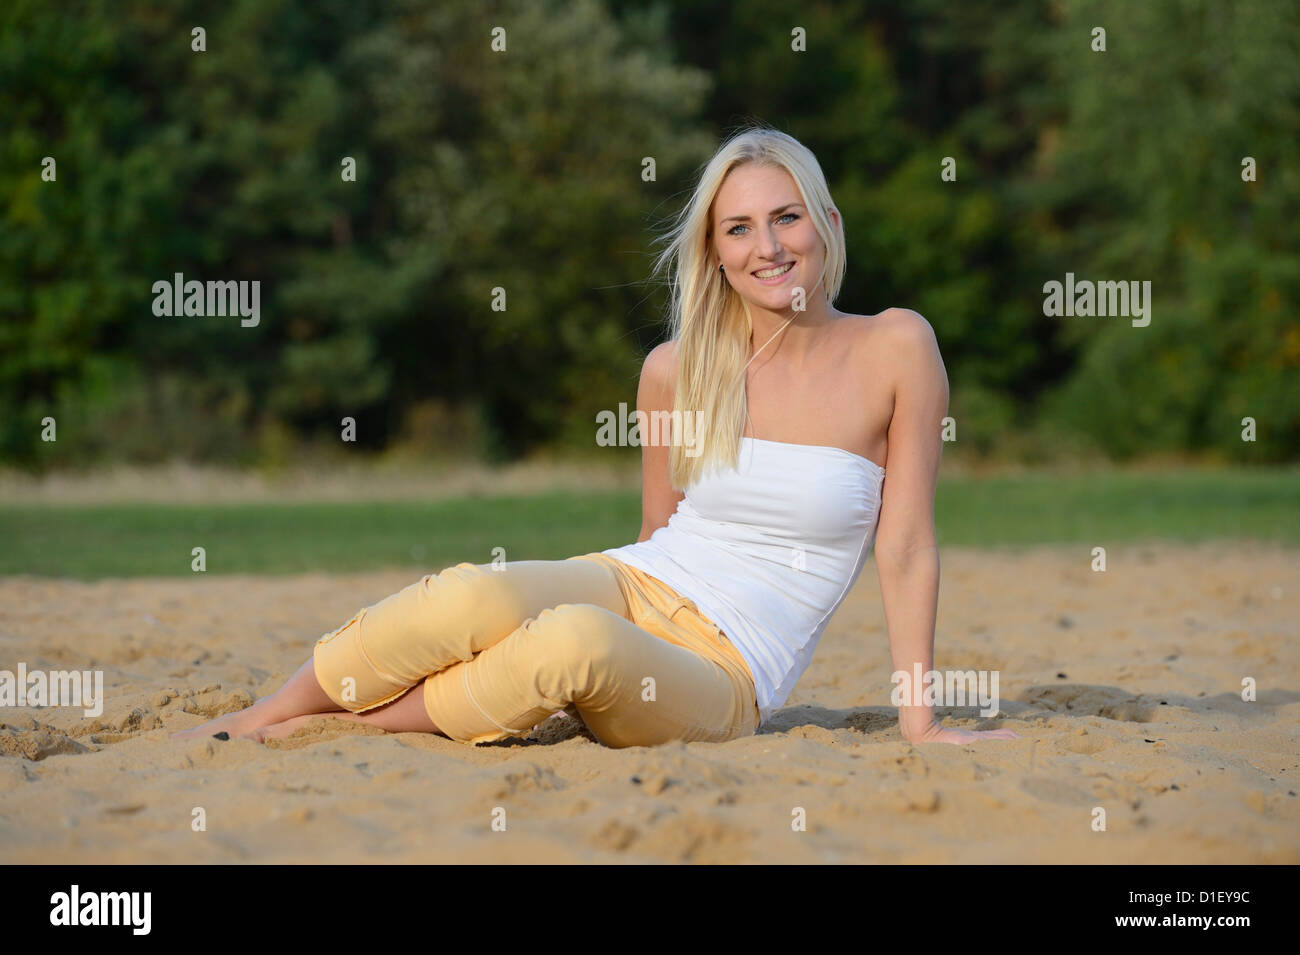 Happy young blonde woman on beach Banque D'Images